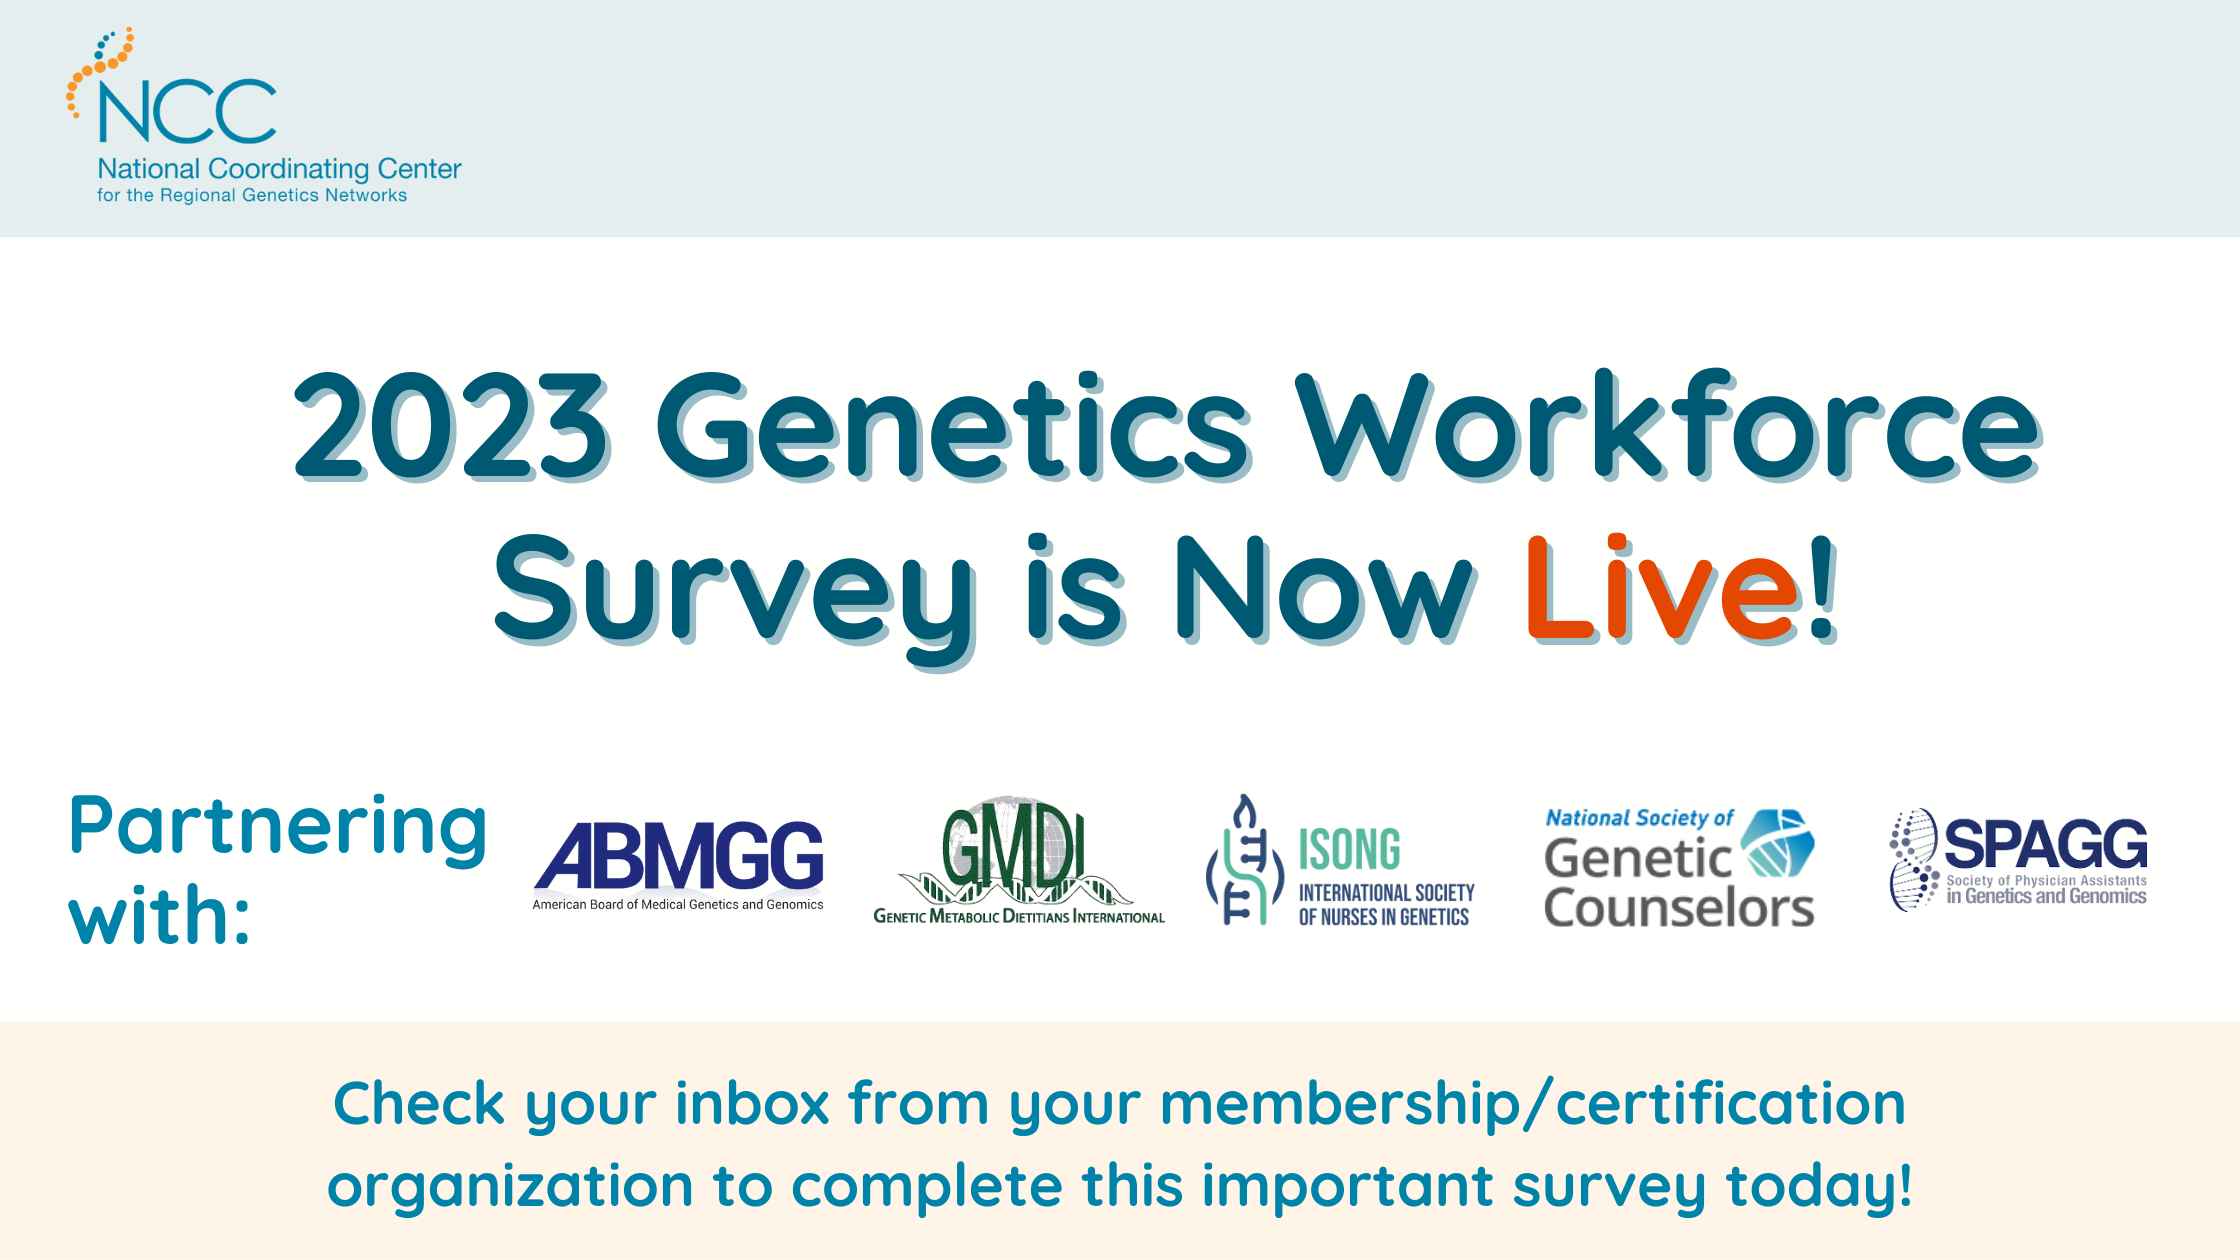 Images: NCC and SPAGG, ABMGG, GMDI, and ISONG logos, envelope</p>
<p>Text: 2023 Genetics Workforce Survey is Now Live!; Check your inbox from your membership/certification organization to complete today!<br />
